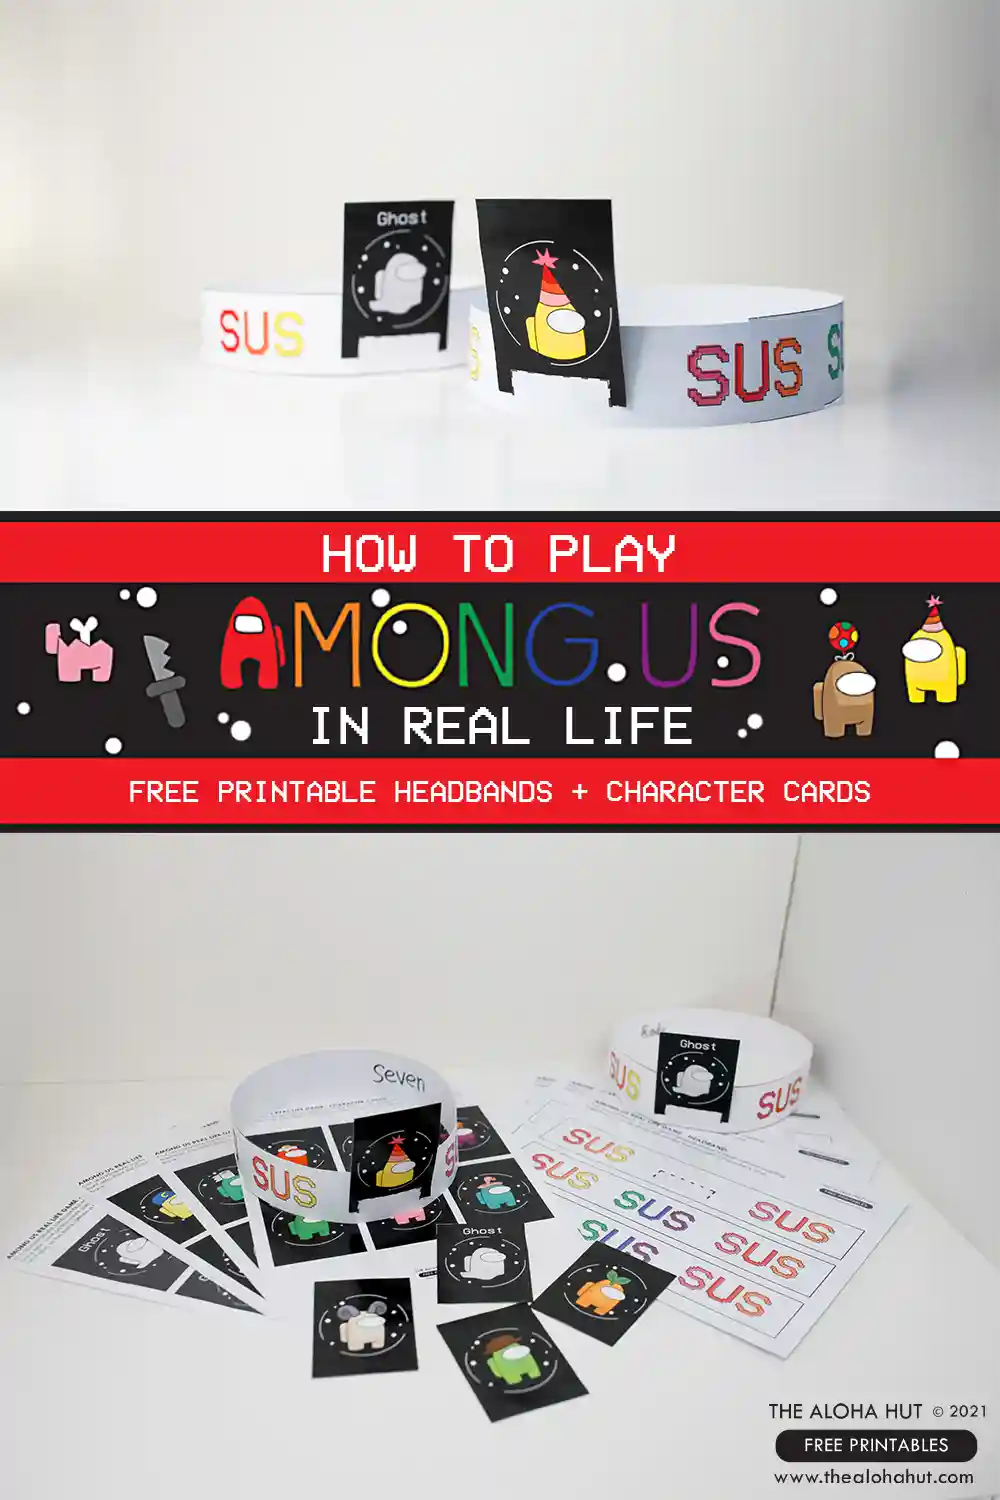 Real Life Among Us Game Printable (with Pictures!) - OriginalMOM